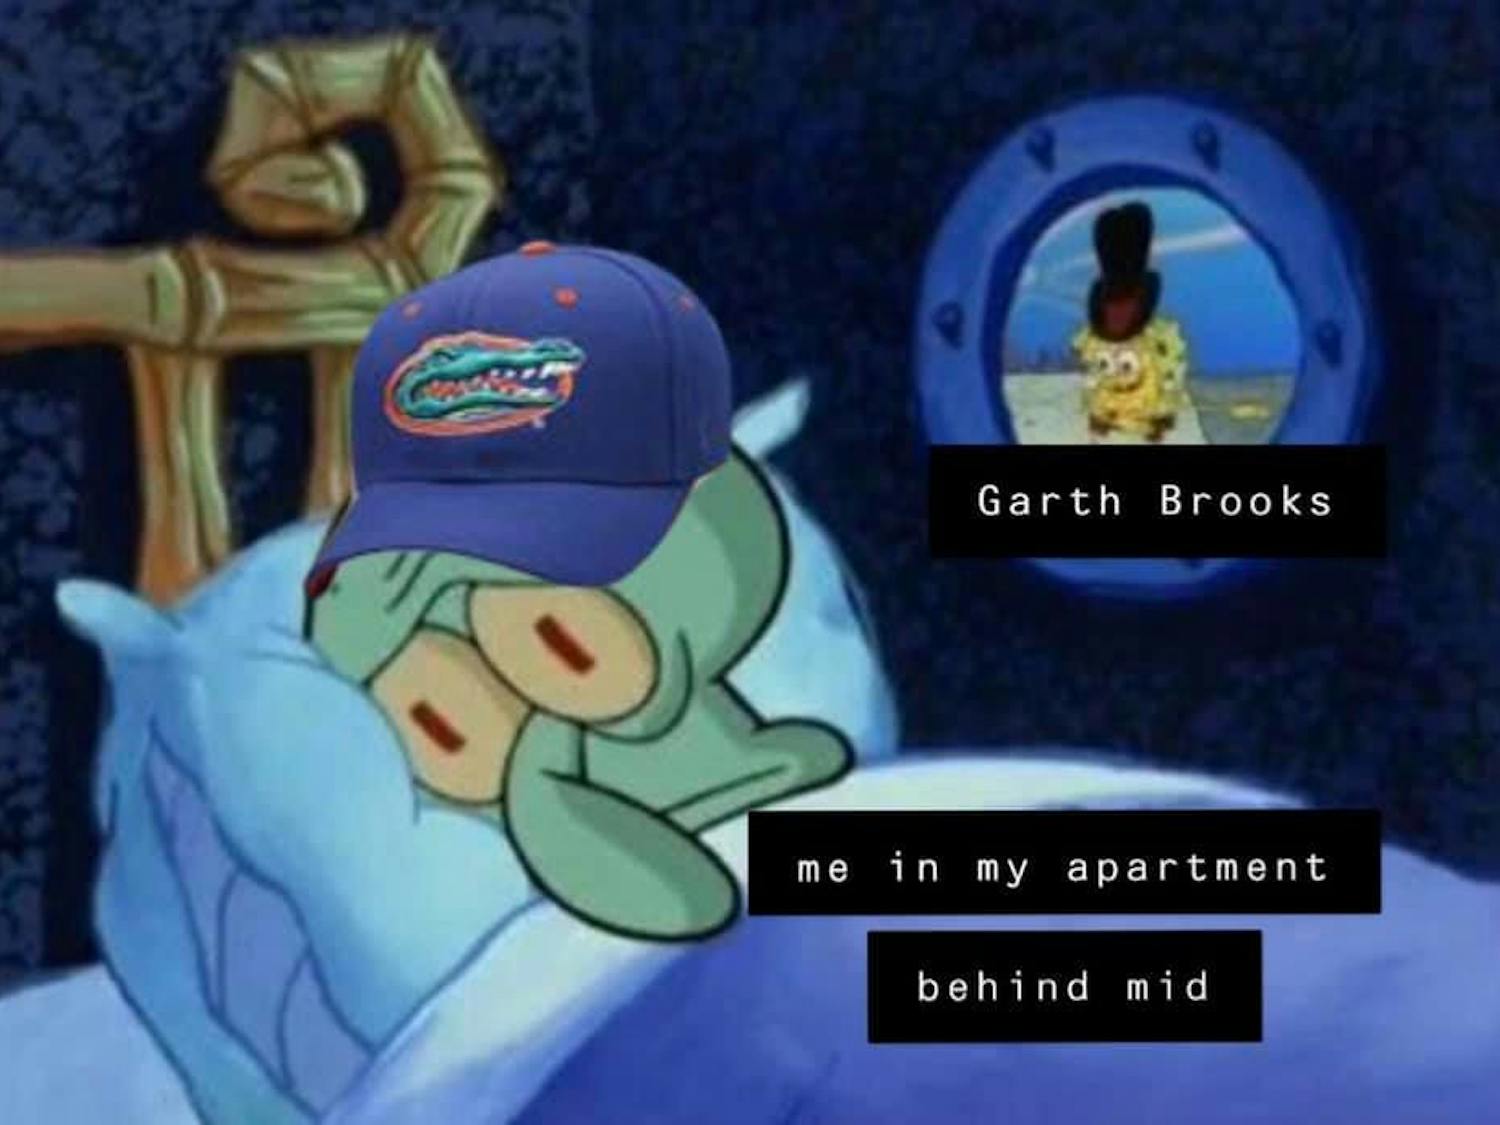 Shannon Moriarty, a 20-year-old UF art history junior, created a SpongeBob SquarePants meme after hearing loud noise from the Garth Brooks concert and soundcheck. She posted it on the Swampy memes for top 10 public teens Facebook group page.